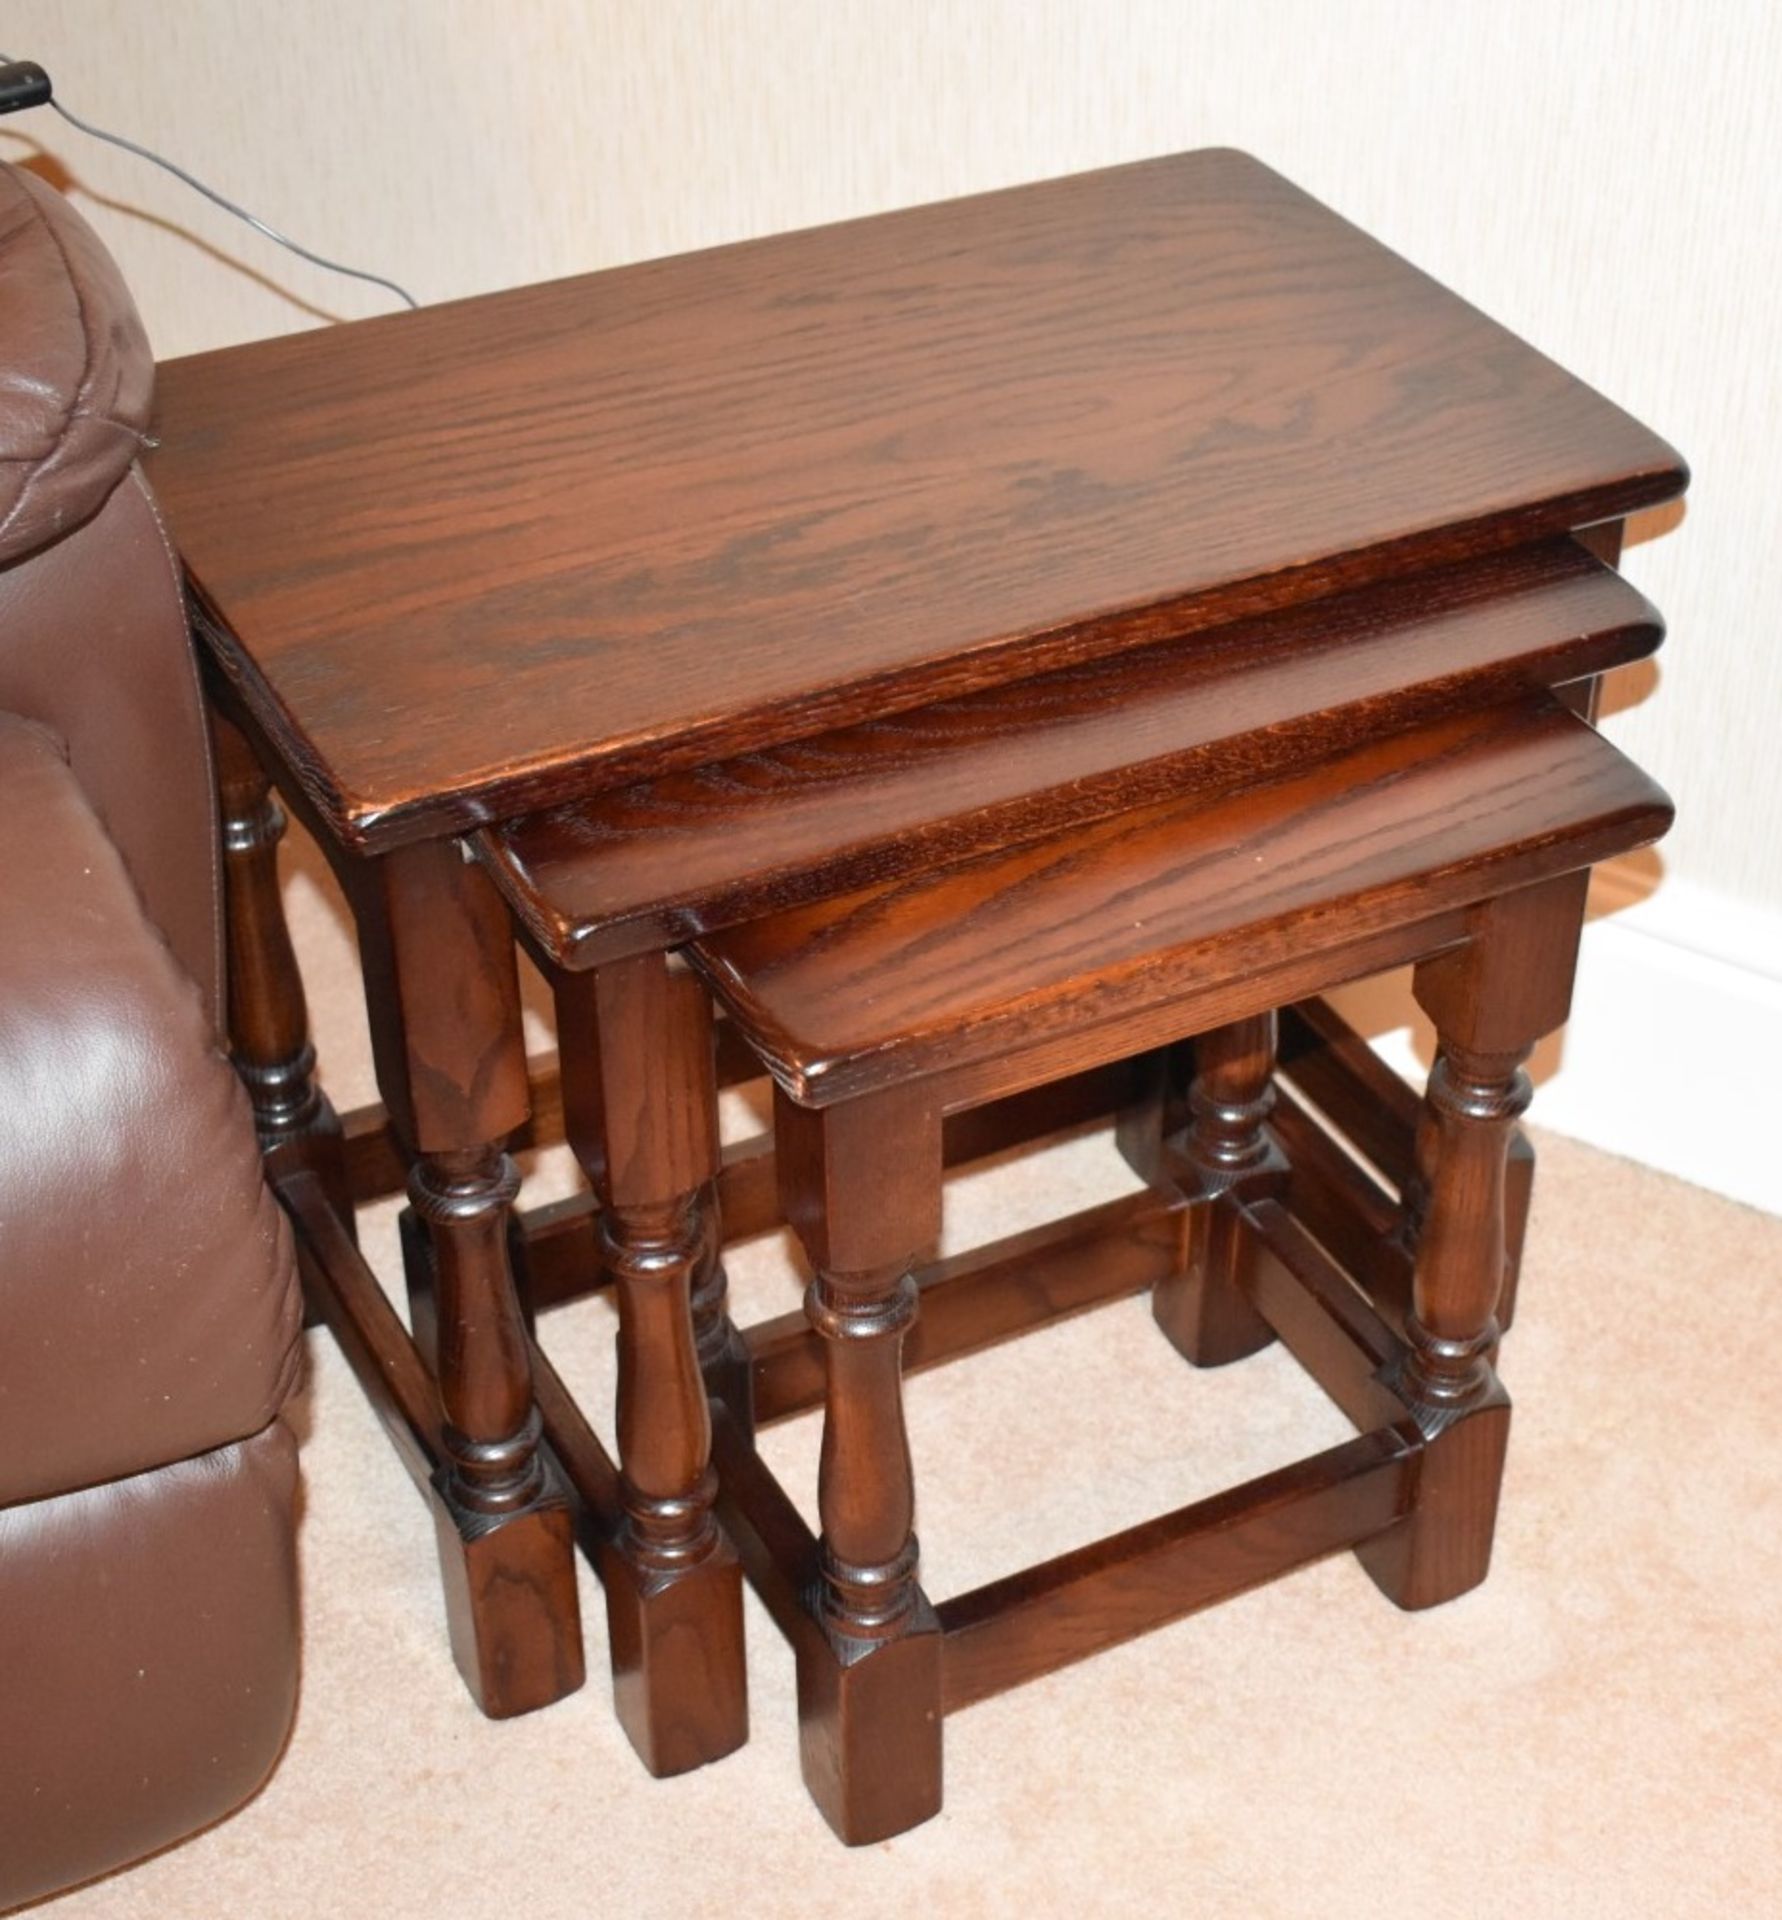 1 x Nest of Oak Tables By Jaycee - Dimensions: H46 x W55 x D35 cms - CL579 - No VAT on the - Image 3 of 6